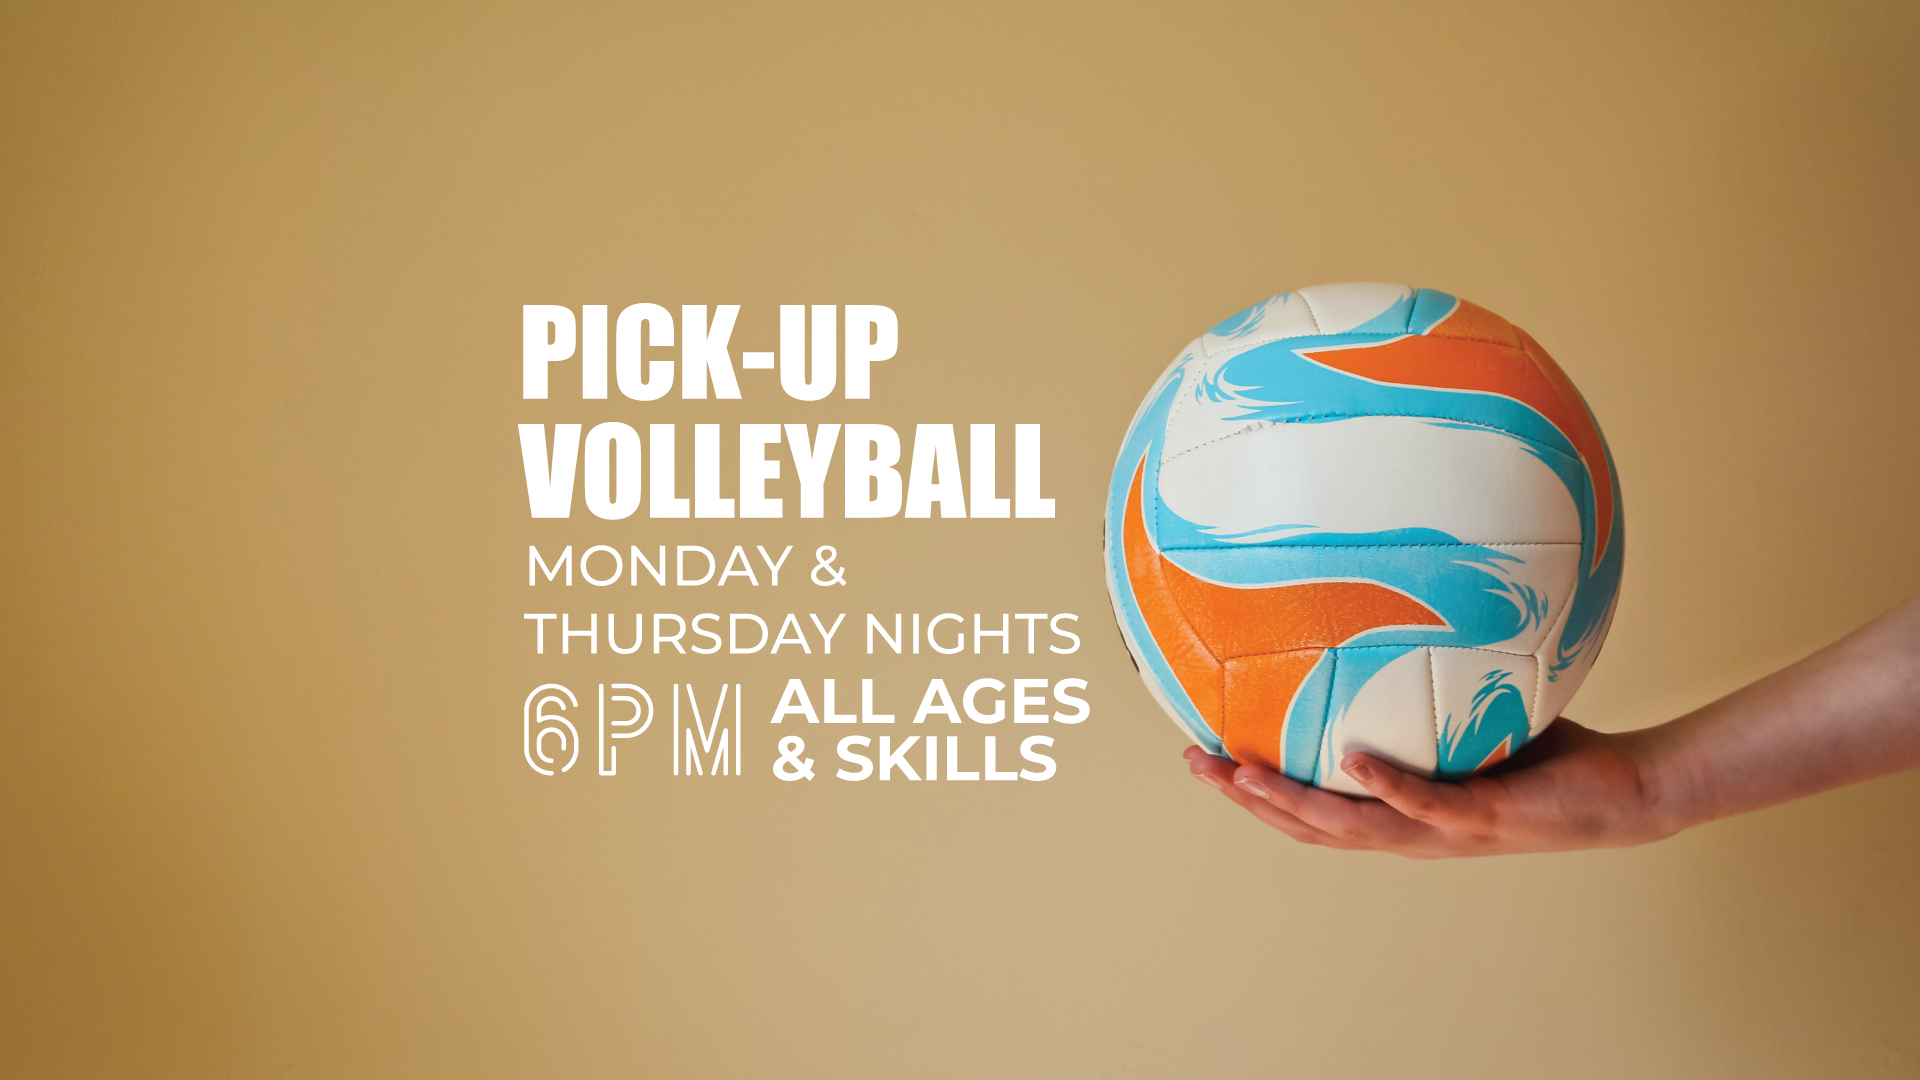 Pick-up Volleyball | Monday and Thursday Nights at 6PM | All ages and skill levels are welcome!